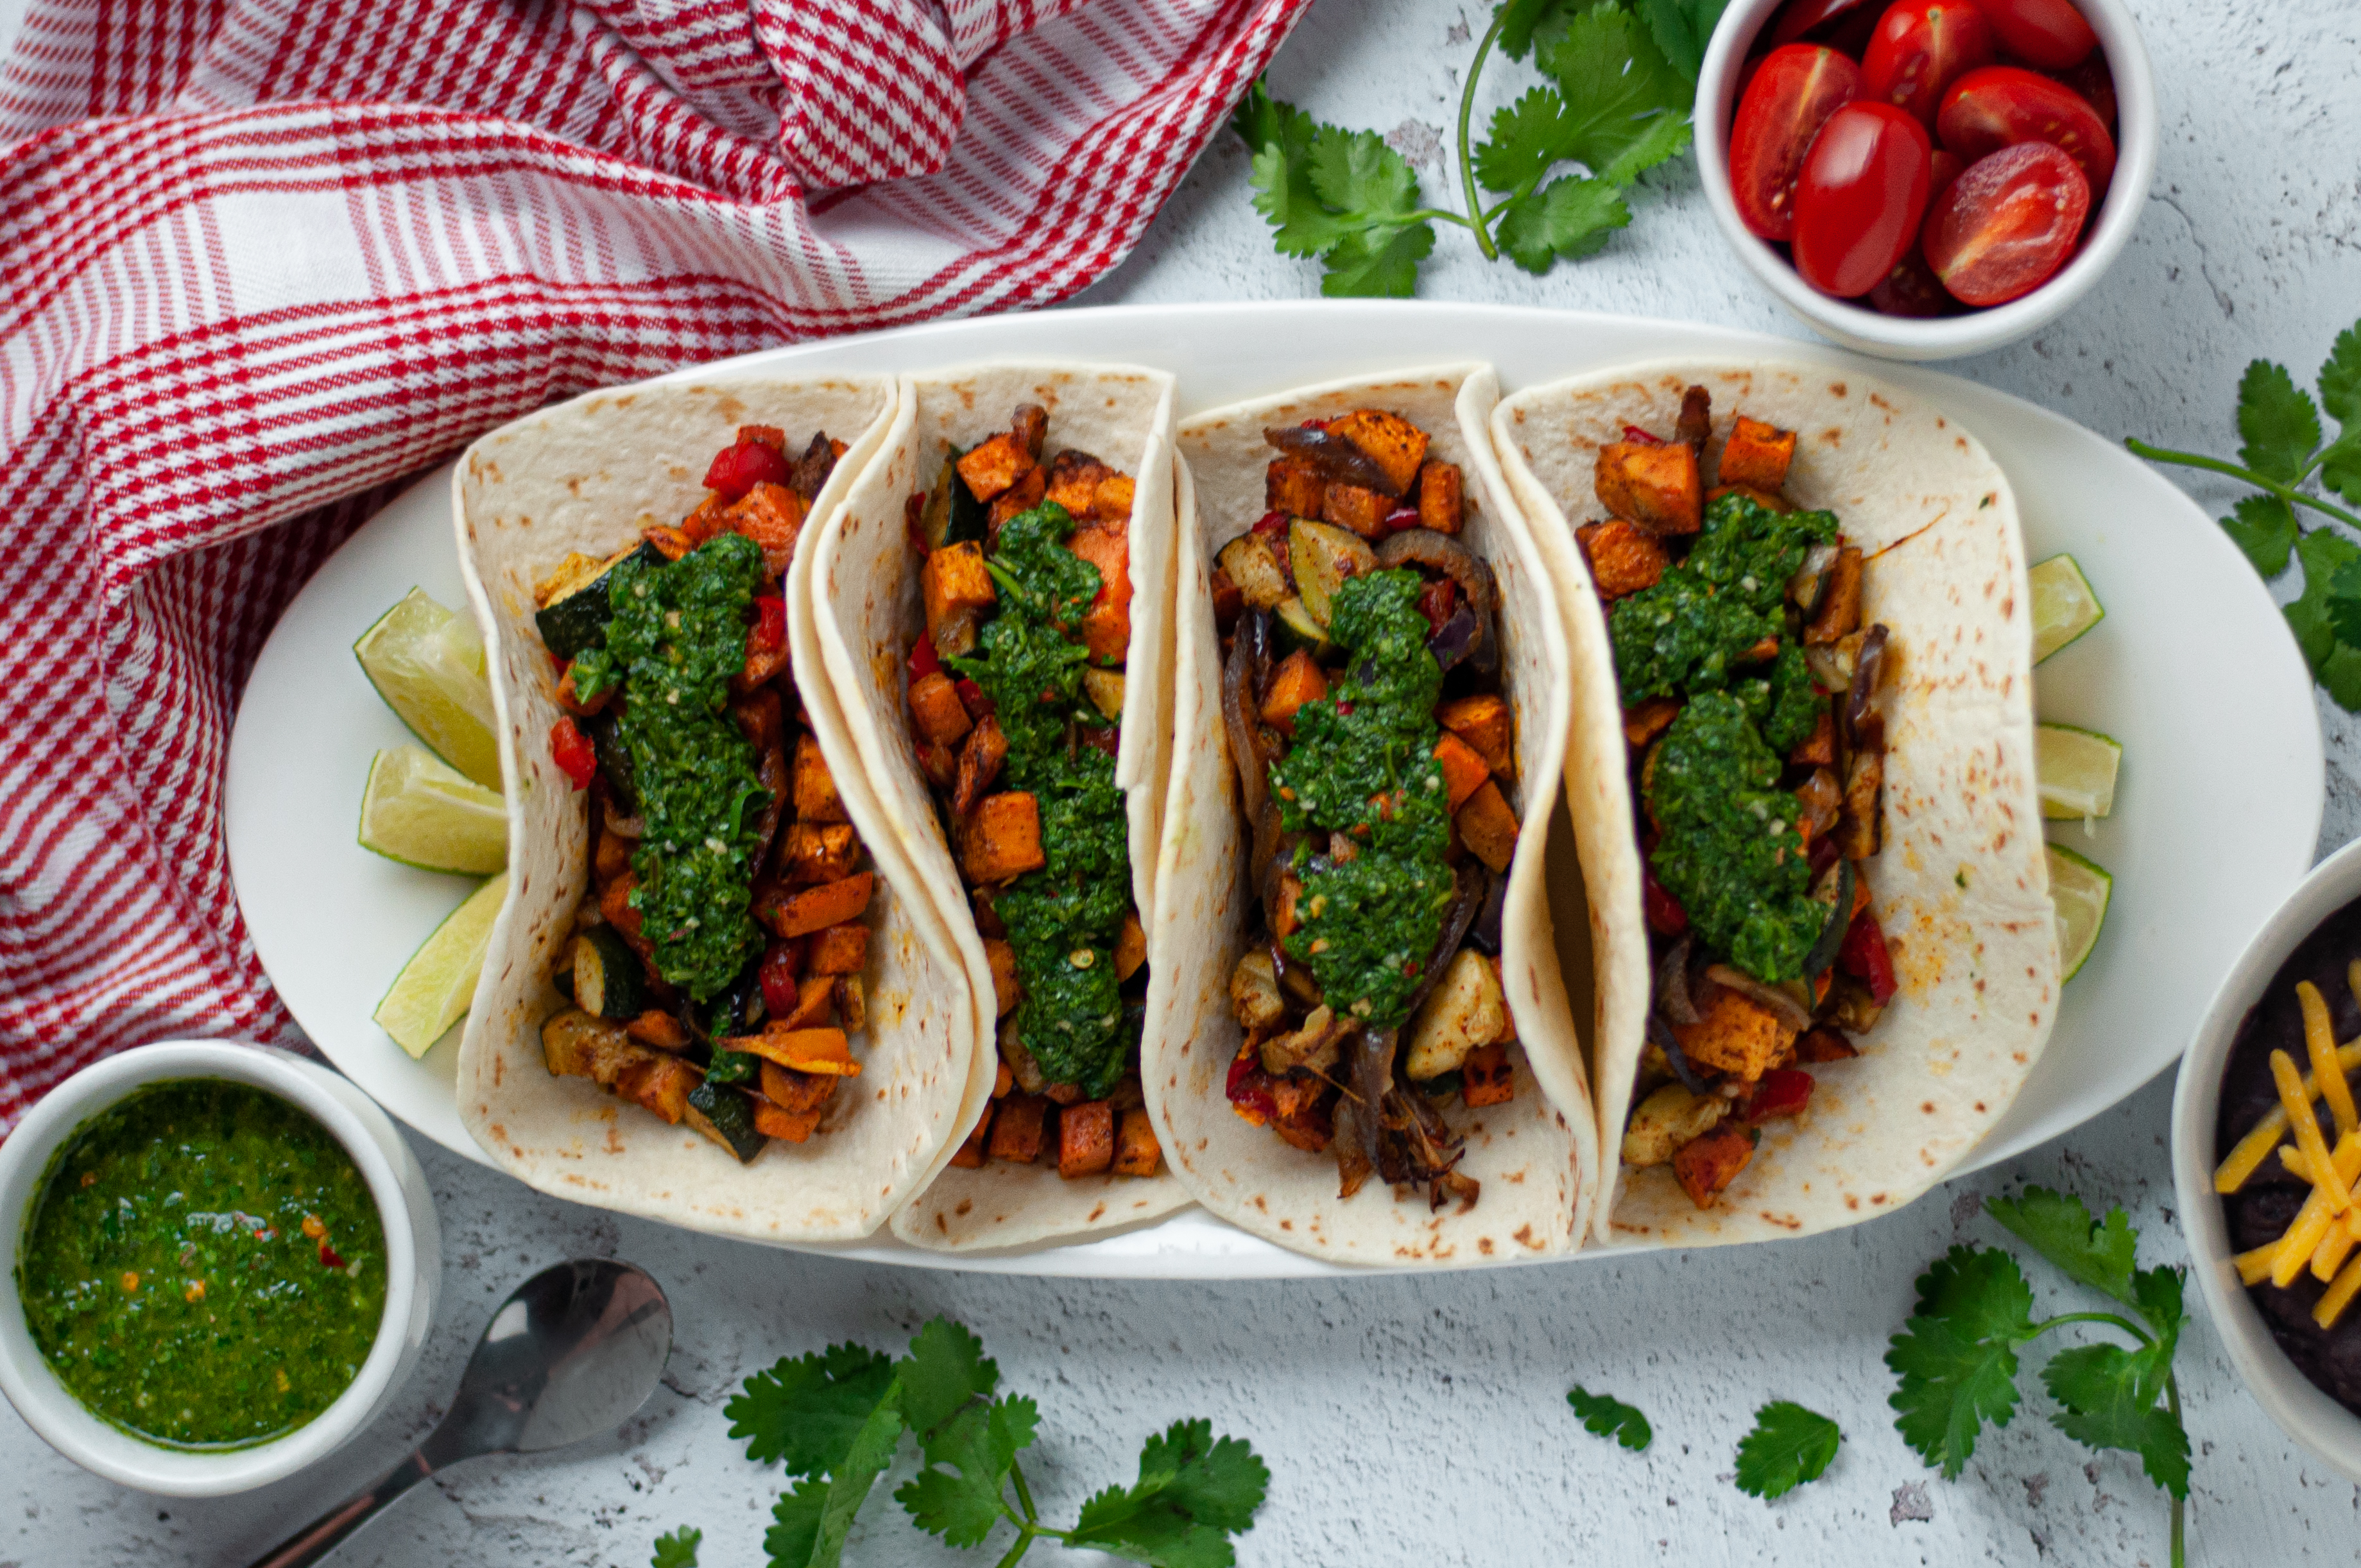 Top down view of a serving platter with 4 vegetarian tacos served up and ready to eat. Surrounded by a brightly colored napkin, tomatoes, cilantro, chimichurri sauce, and a side of beans